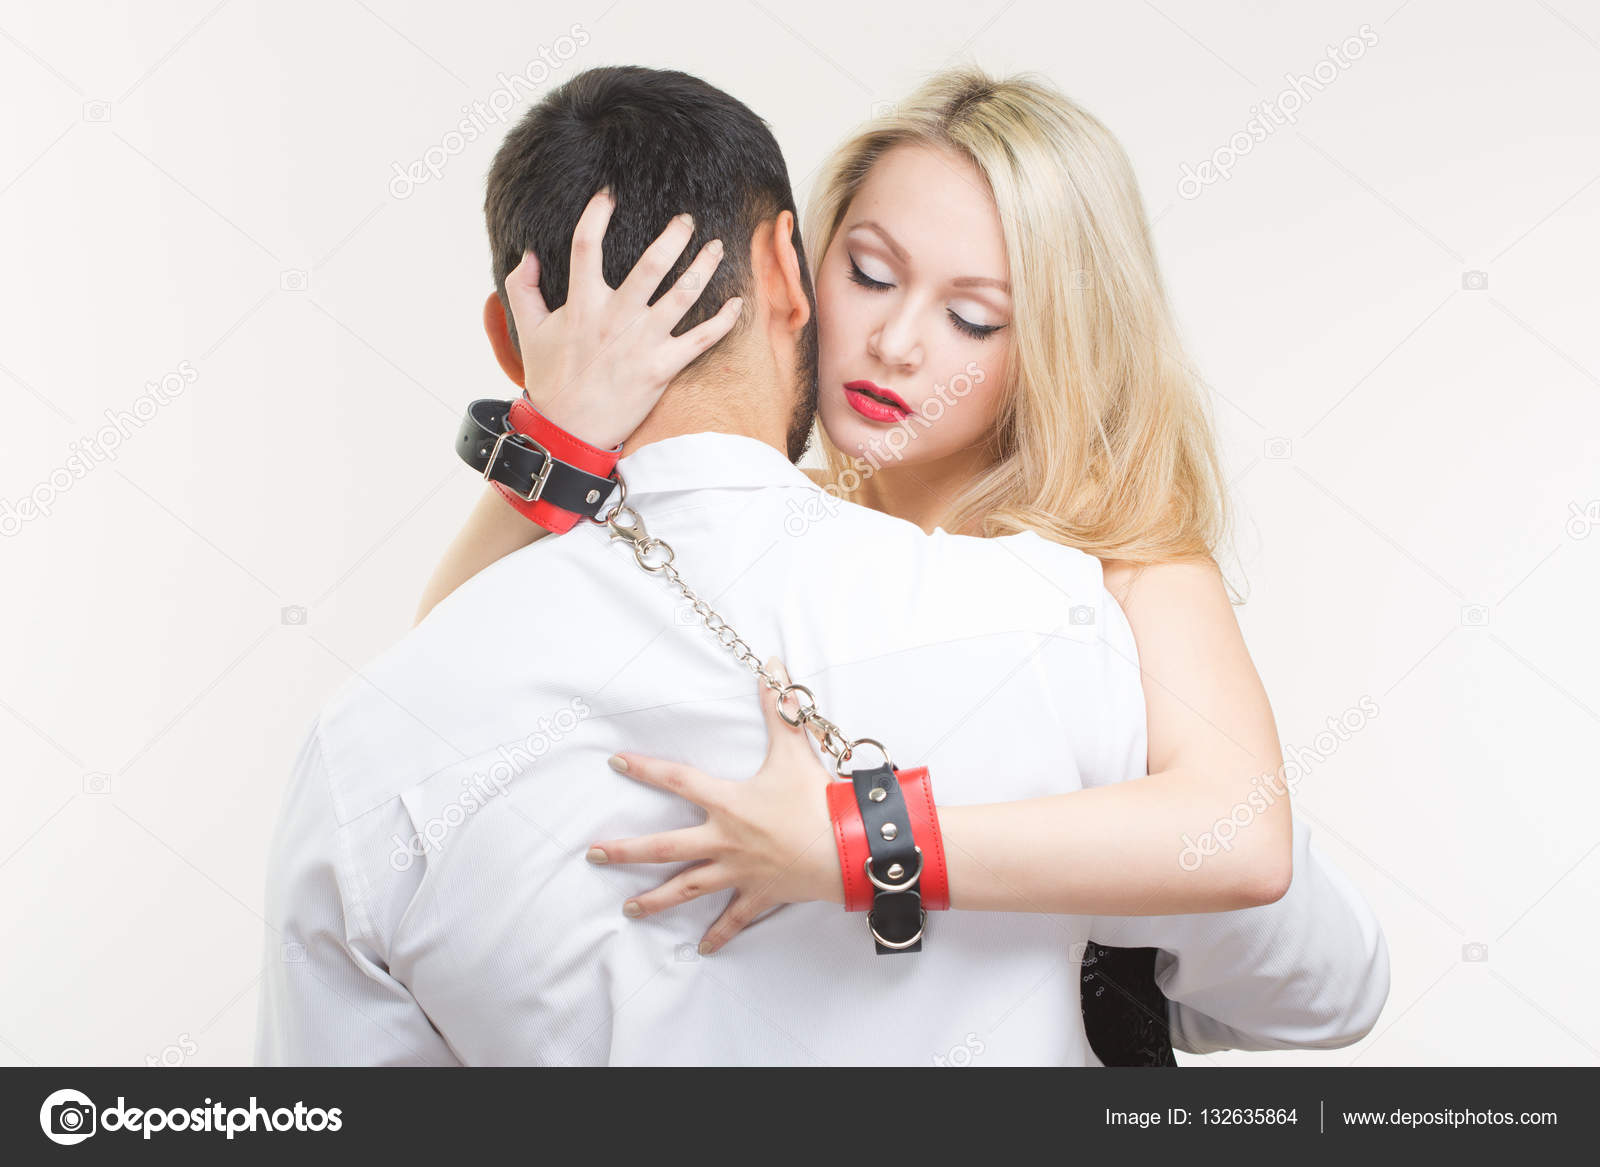 Handcuffs couple -  France